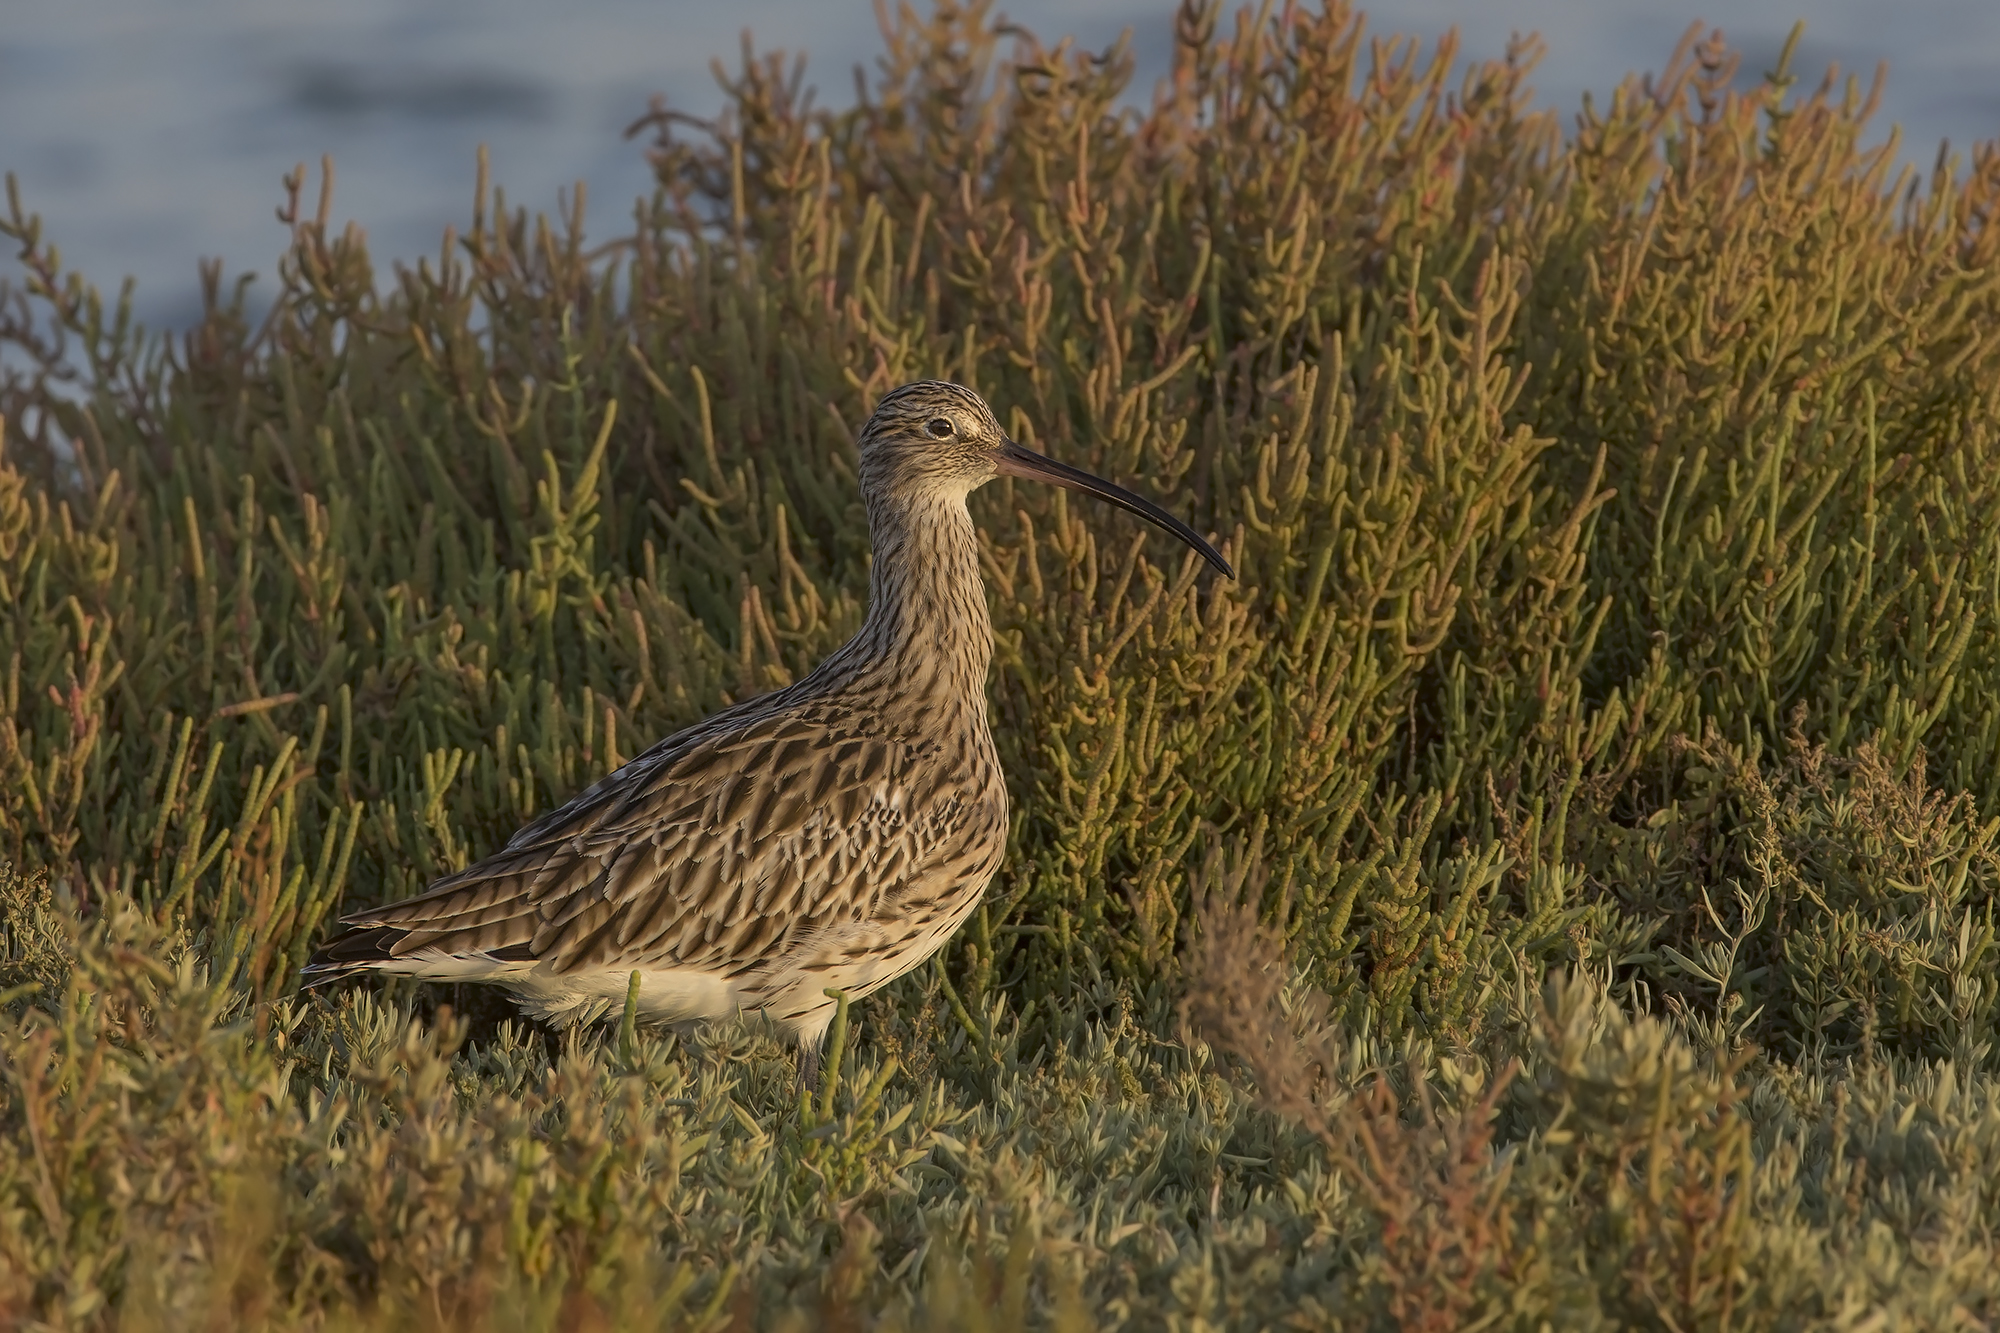 Curlew (Numenius arched) at sunset...